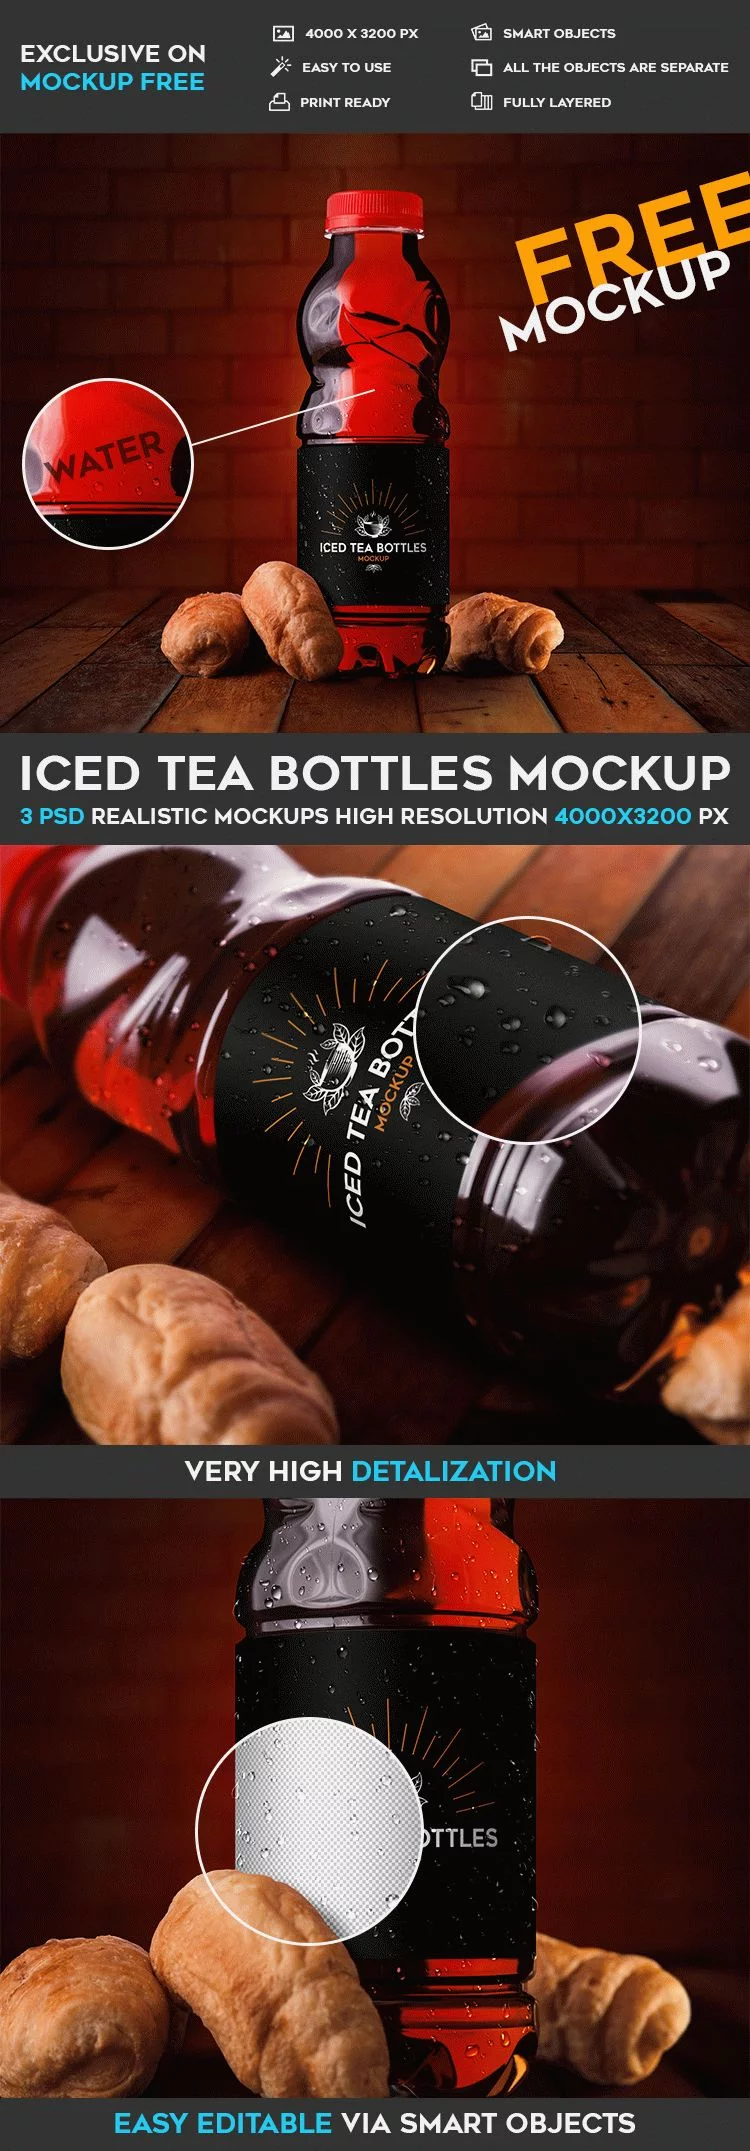 bigpreview_iced-tea-bottles-mockup-template-free-in-psd